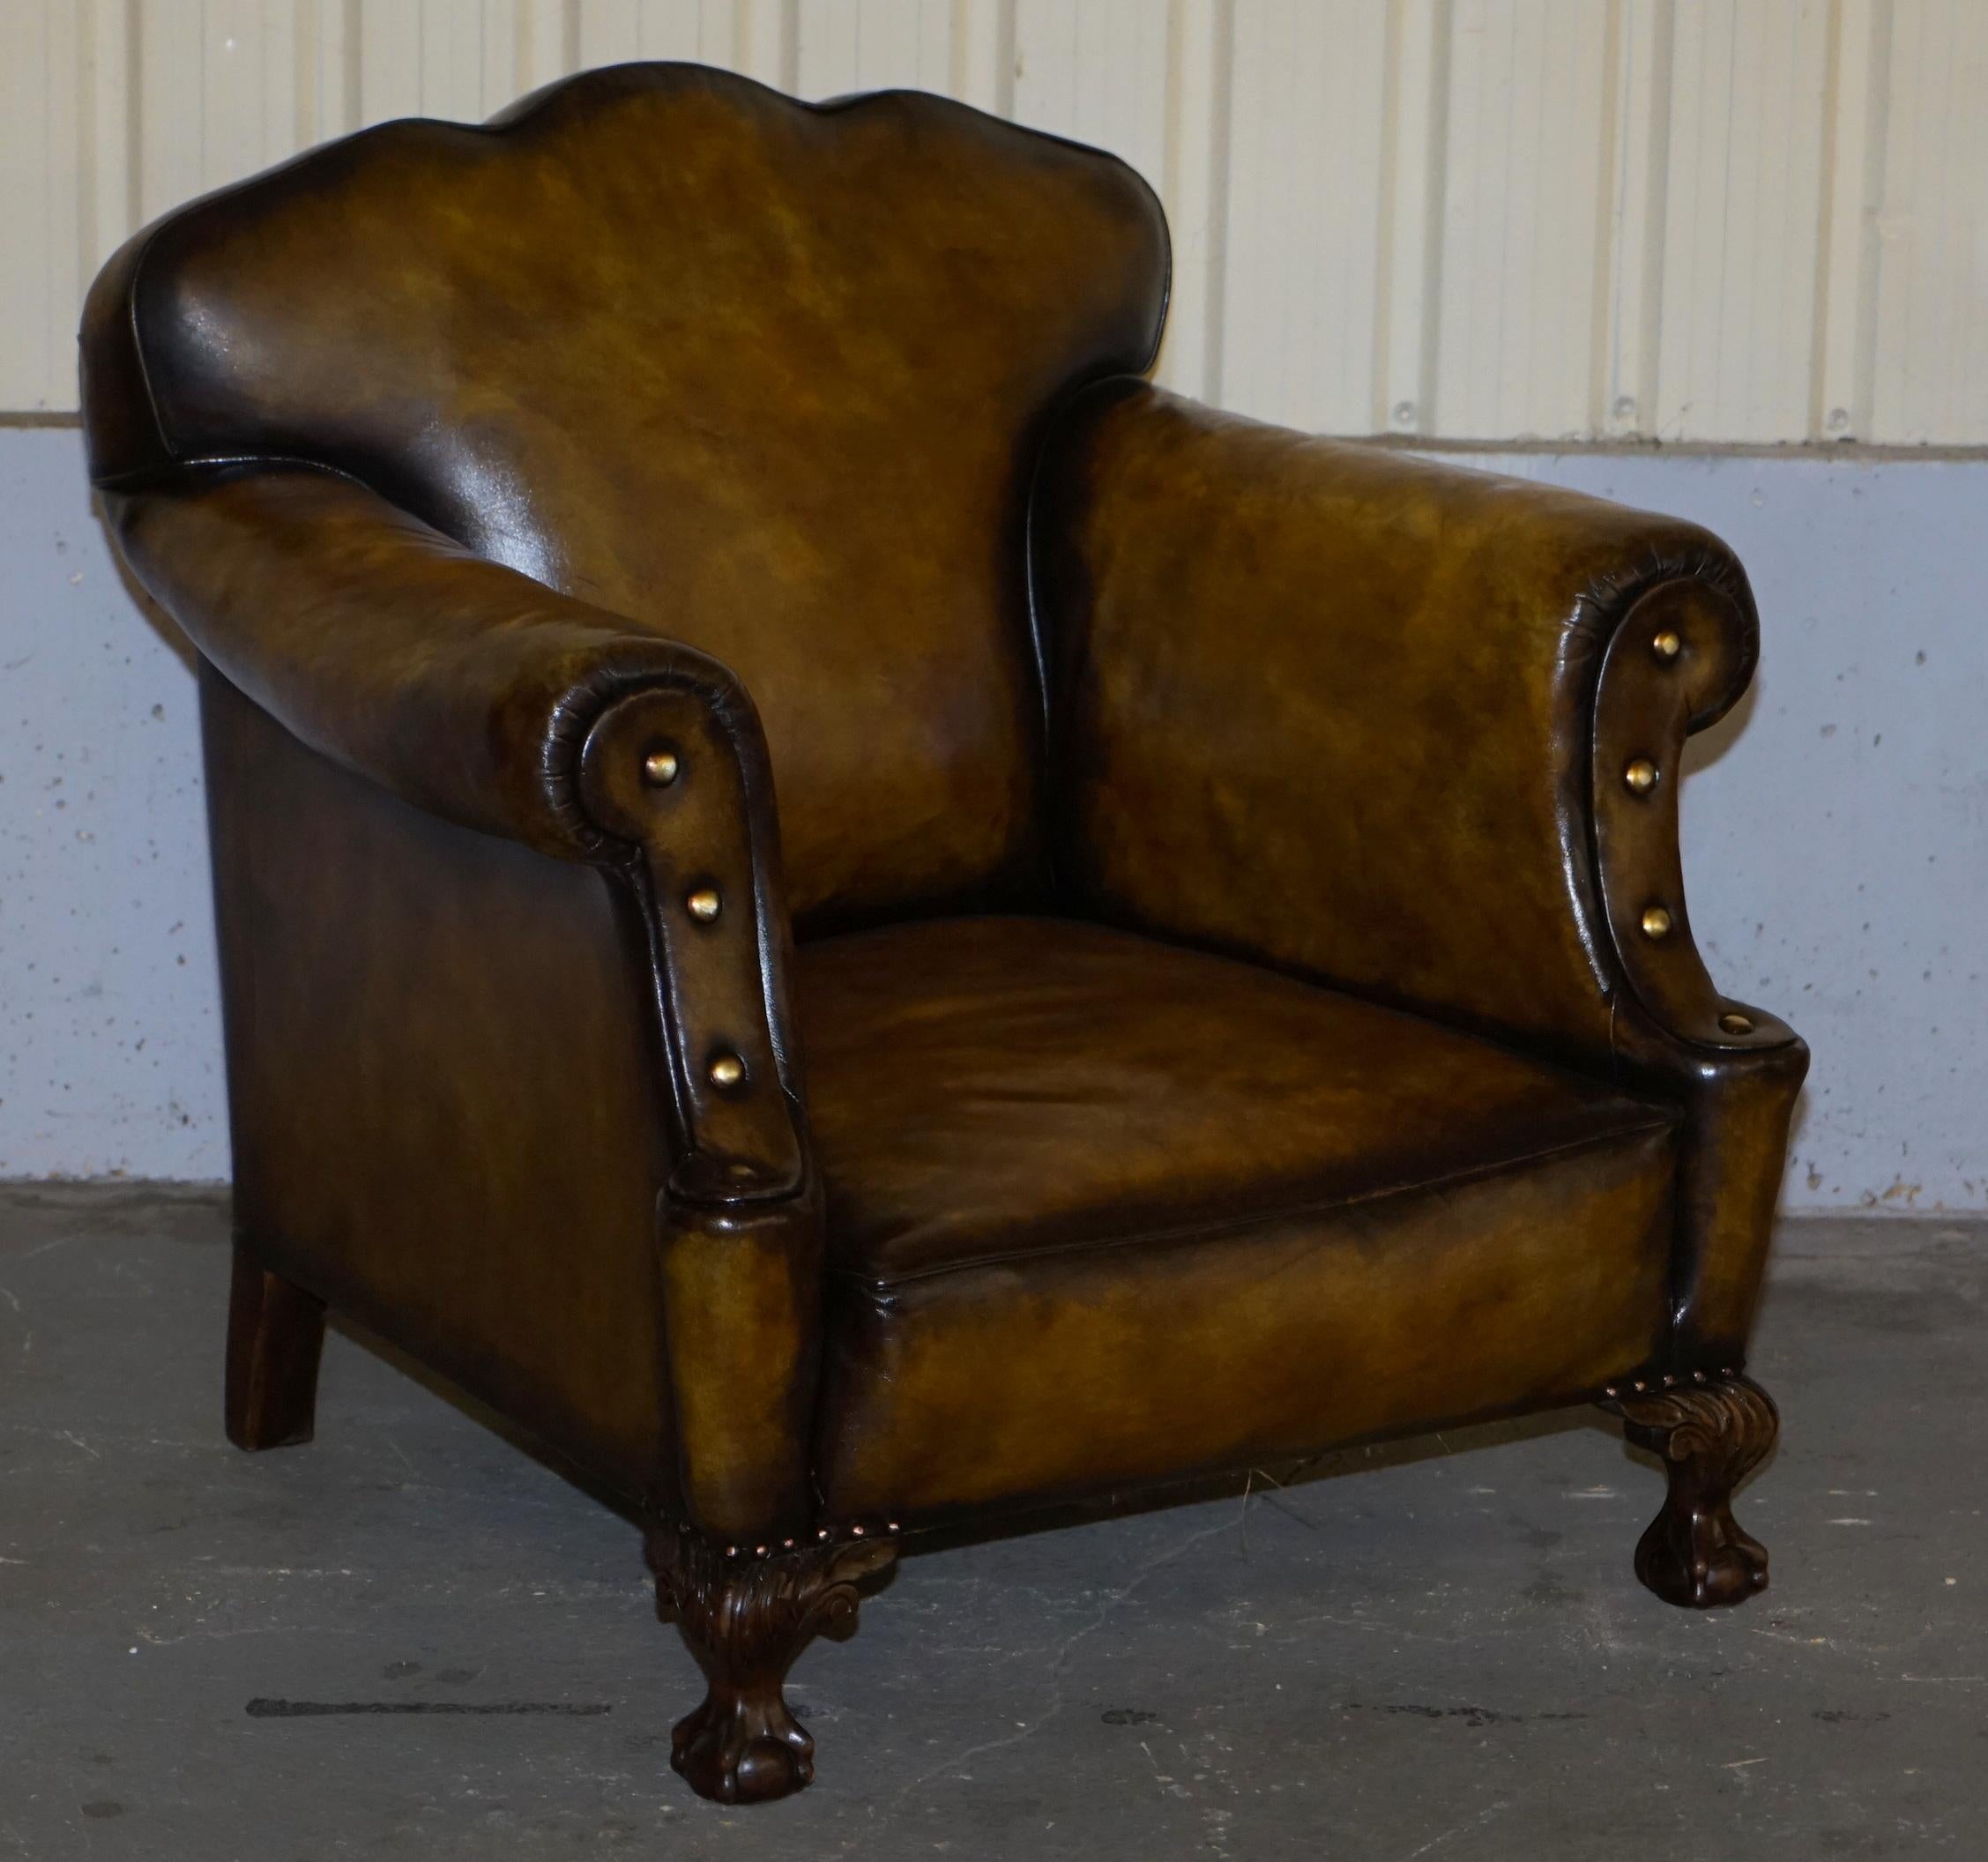 We are delighted to offer for sale this stunning pair of large fully restored hand dyed Cigar brown leather club armchairs with oversized studs and claw and ball feet

A very good looking well made and substantial armchairs. They are upholstered